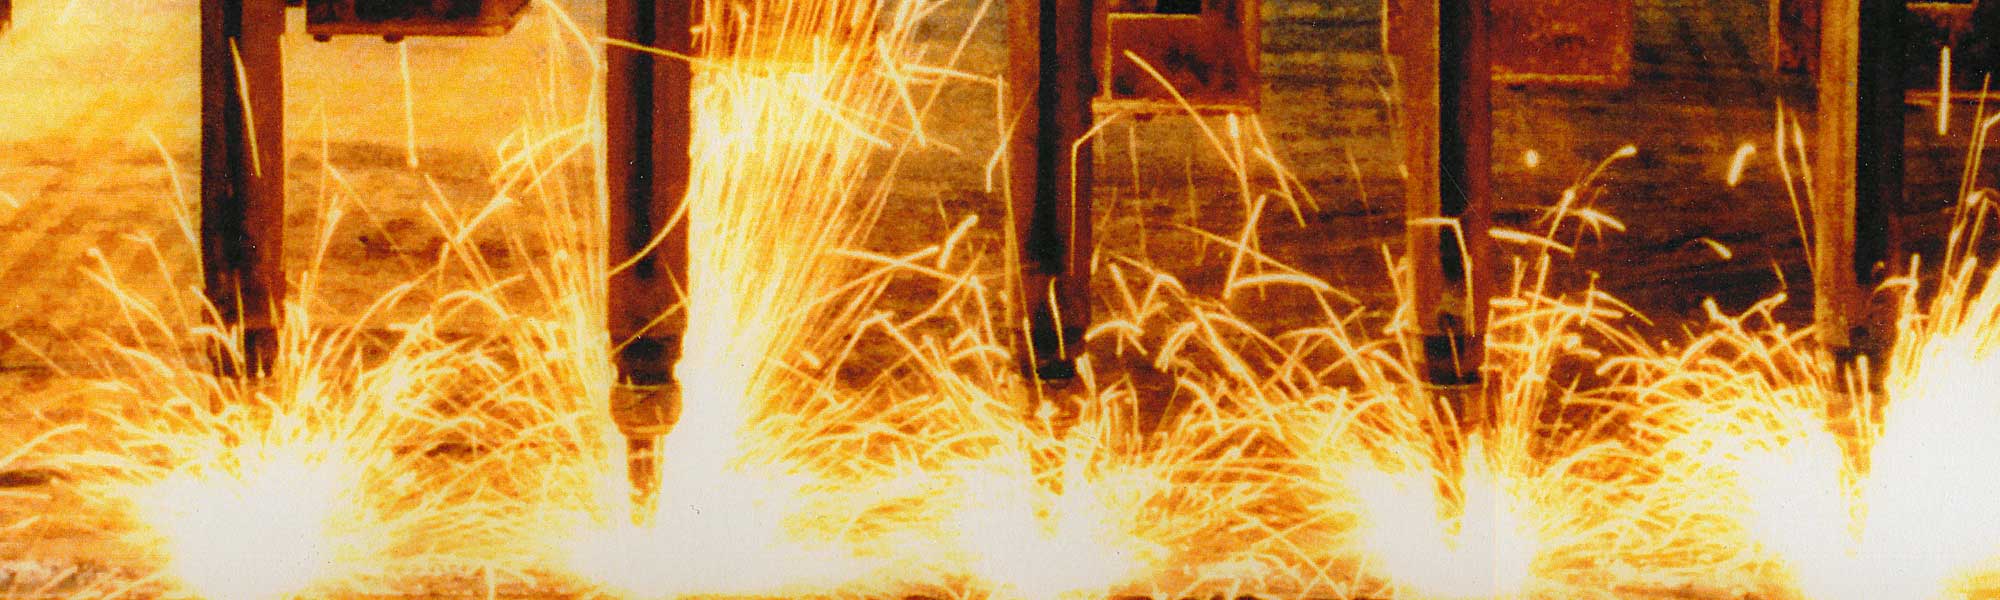 sparks flying at a steel fabrication shop